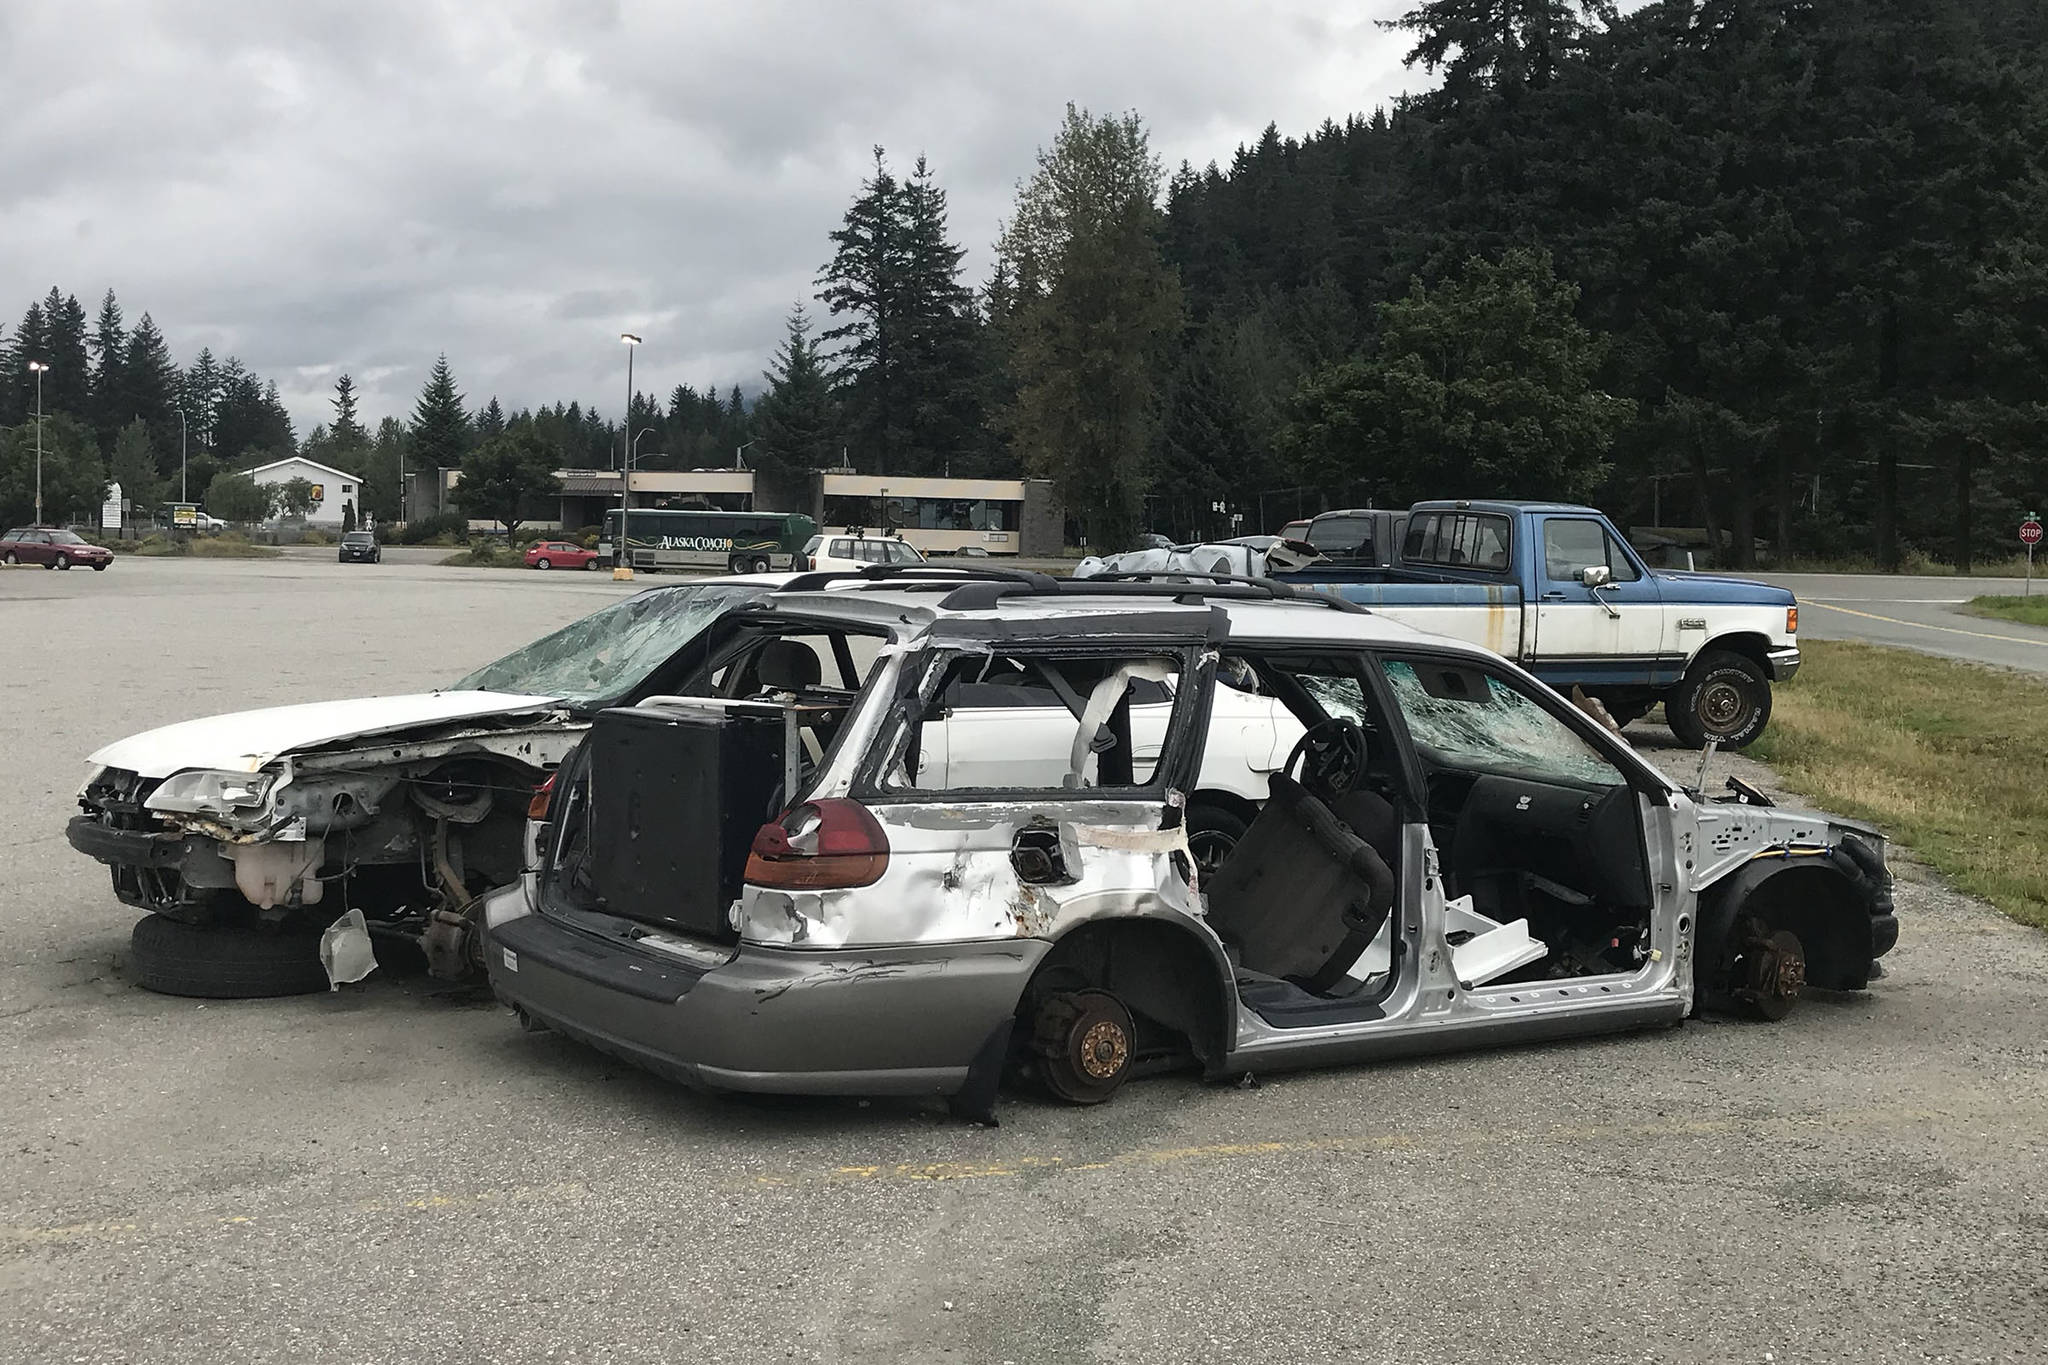 Abandoned cars sit in the parking lot of the Nugget Mall on Thursday, Aug. 30, 2018. The Juneau Police Department is evaluating approaches to getting abandoned vehicles off private property faster. (Alex McCarthy | Juneau Empire)